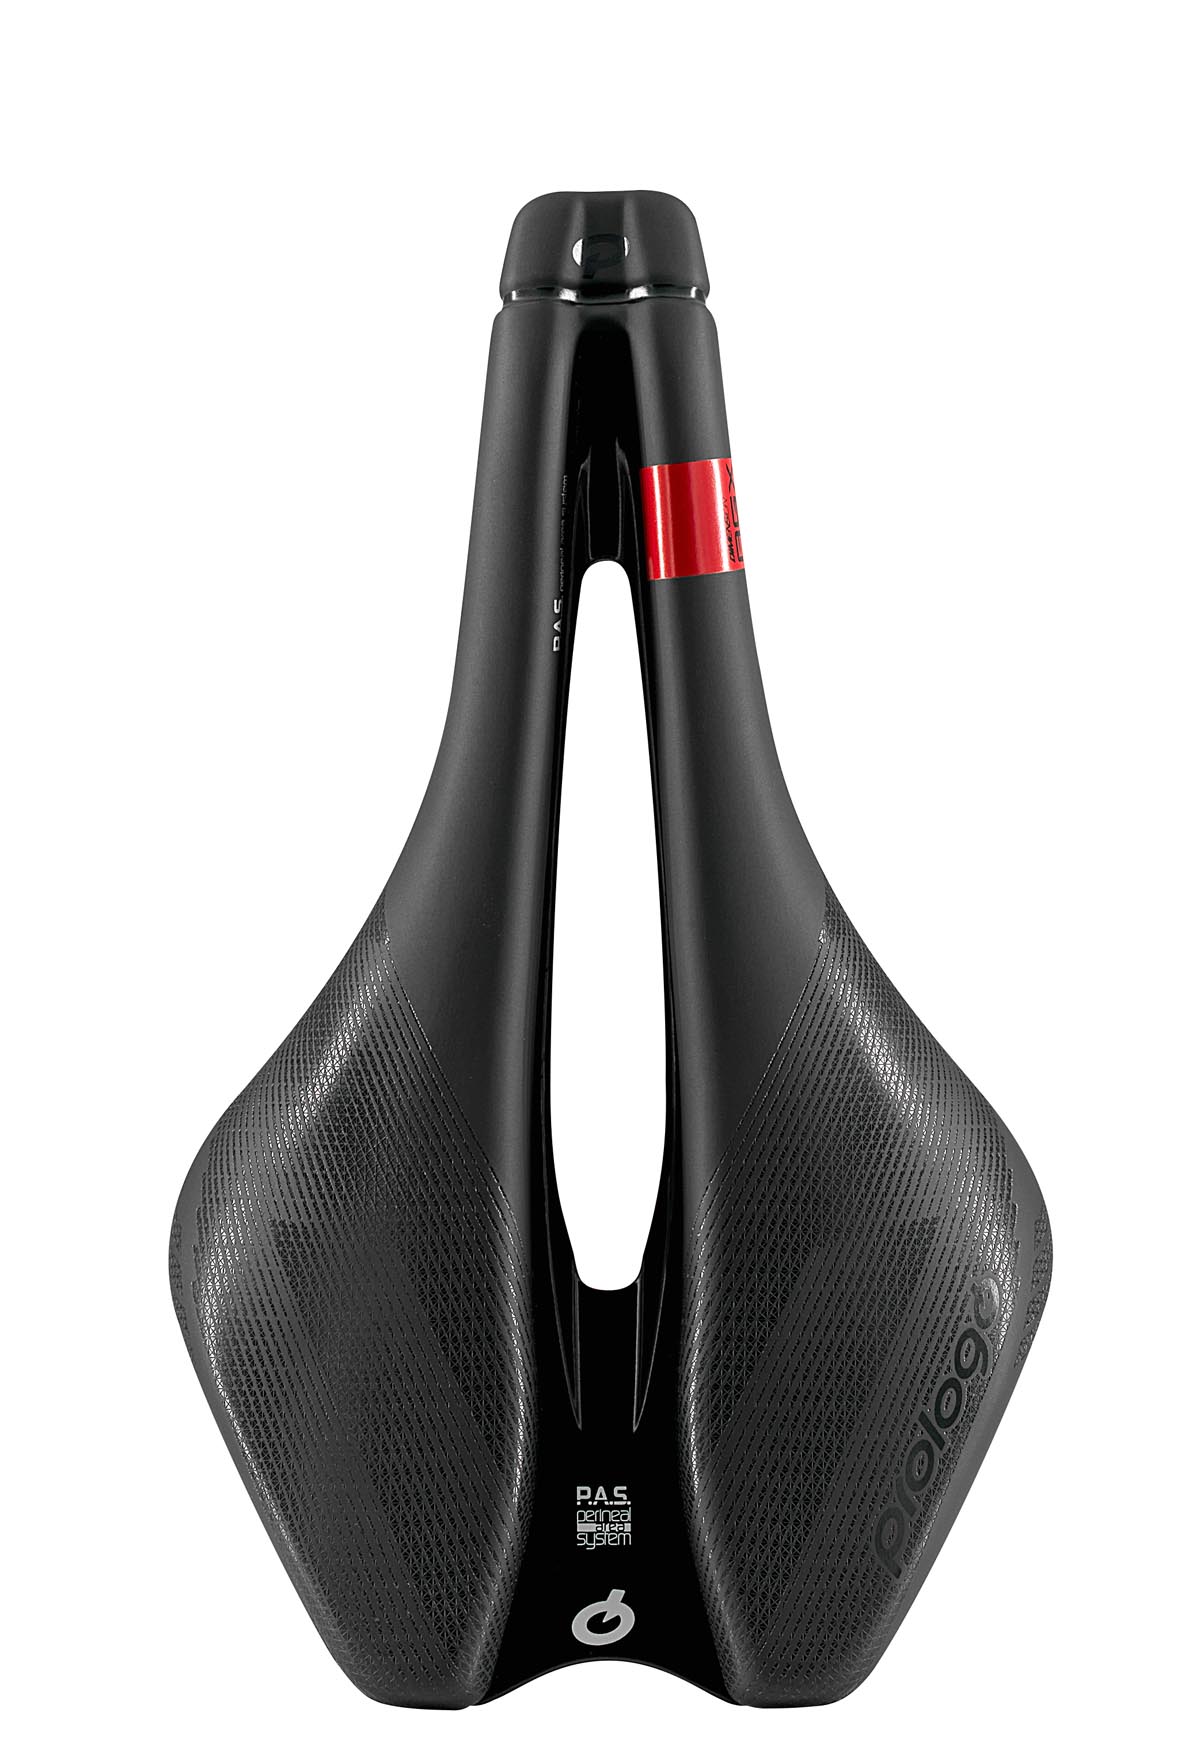 New Progolo AGX saddle range is shaped to support Adventure, Gravel, & cX